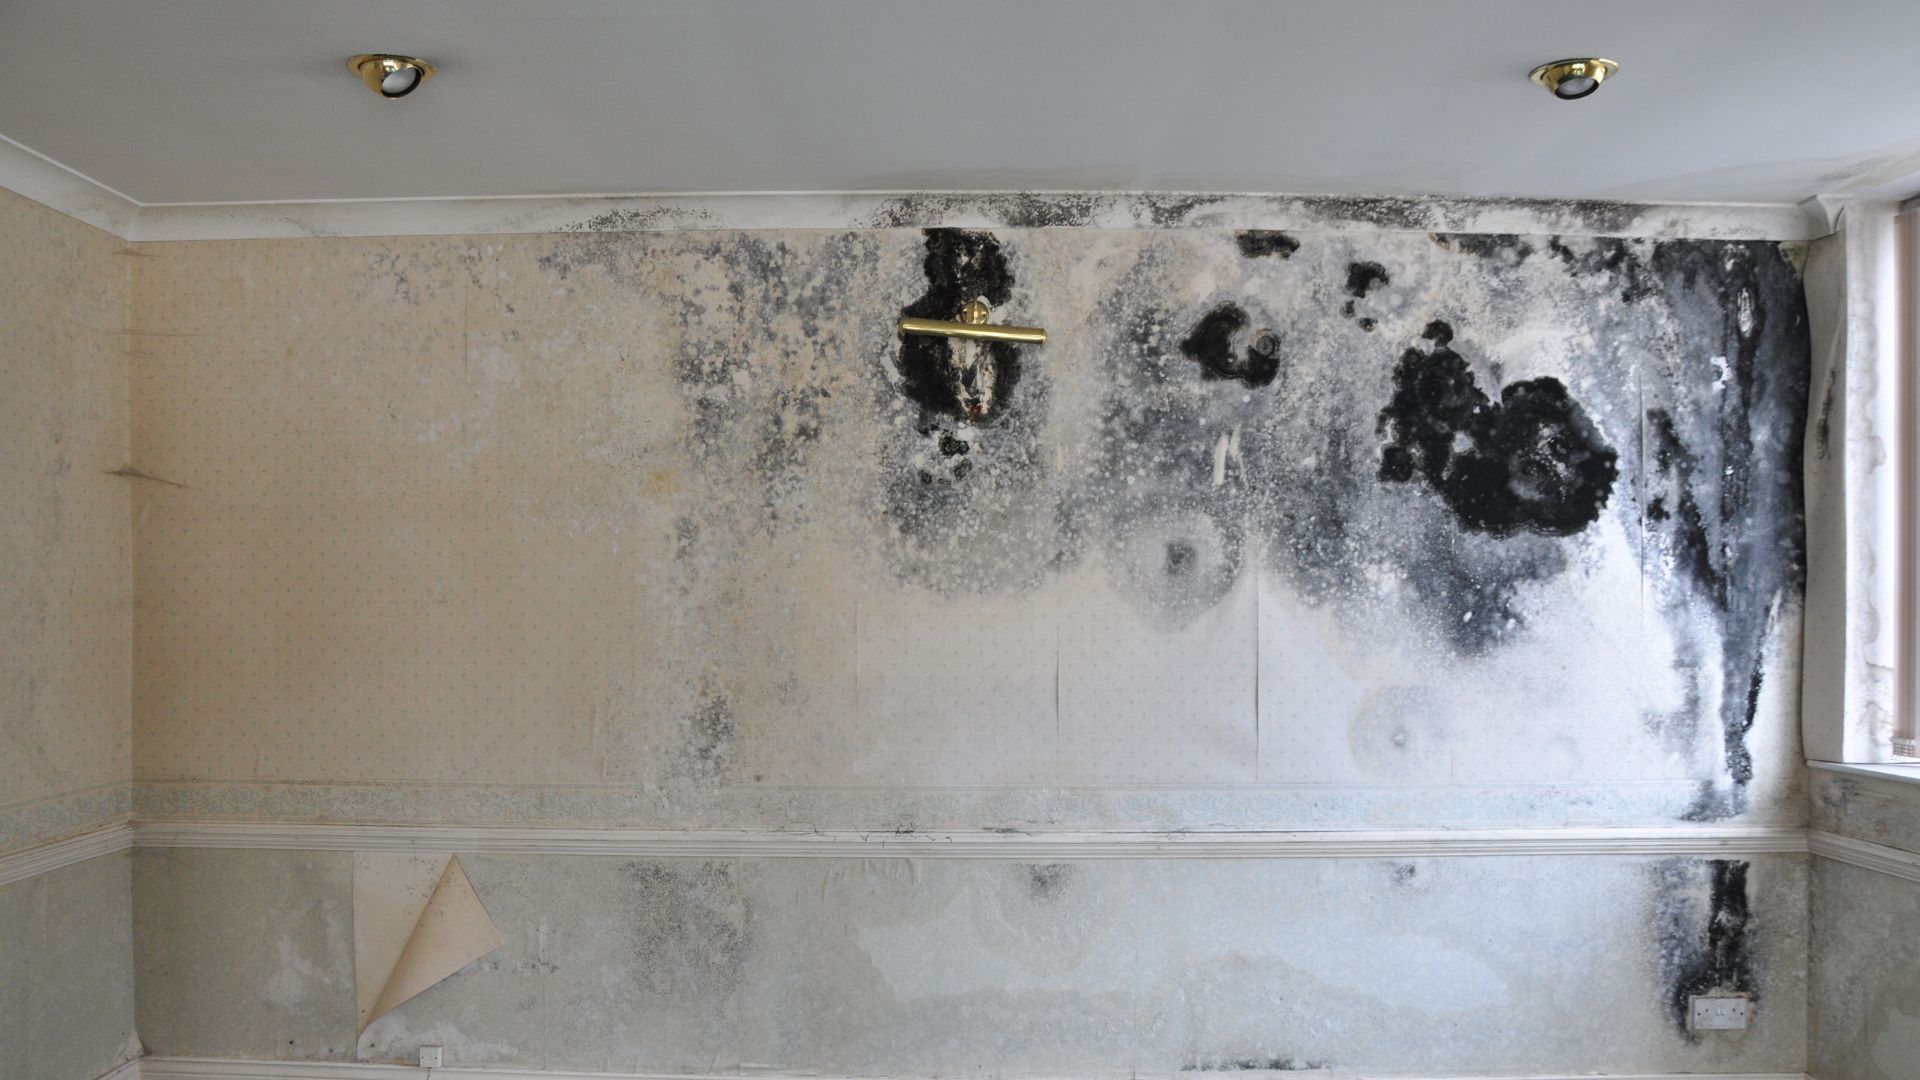 How Long Does It Take For Mould To Grow?